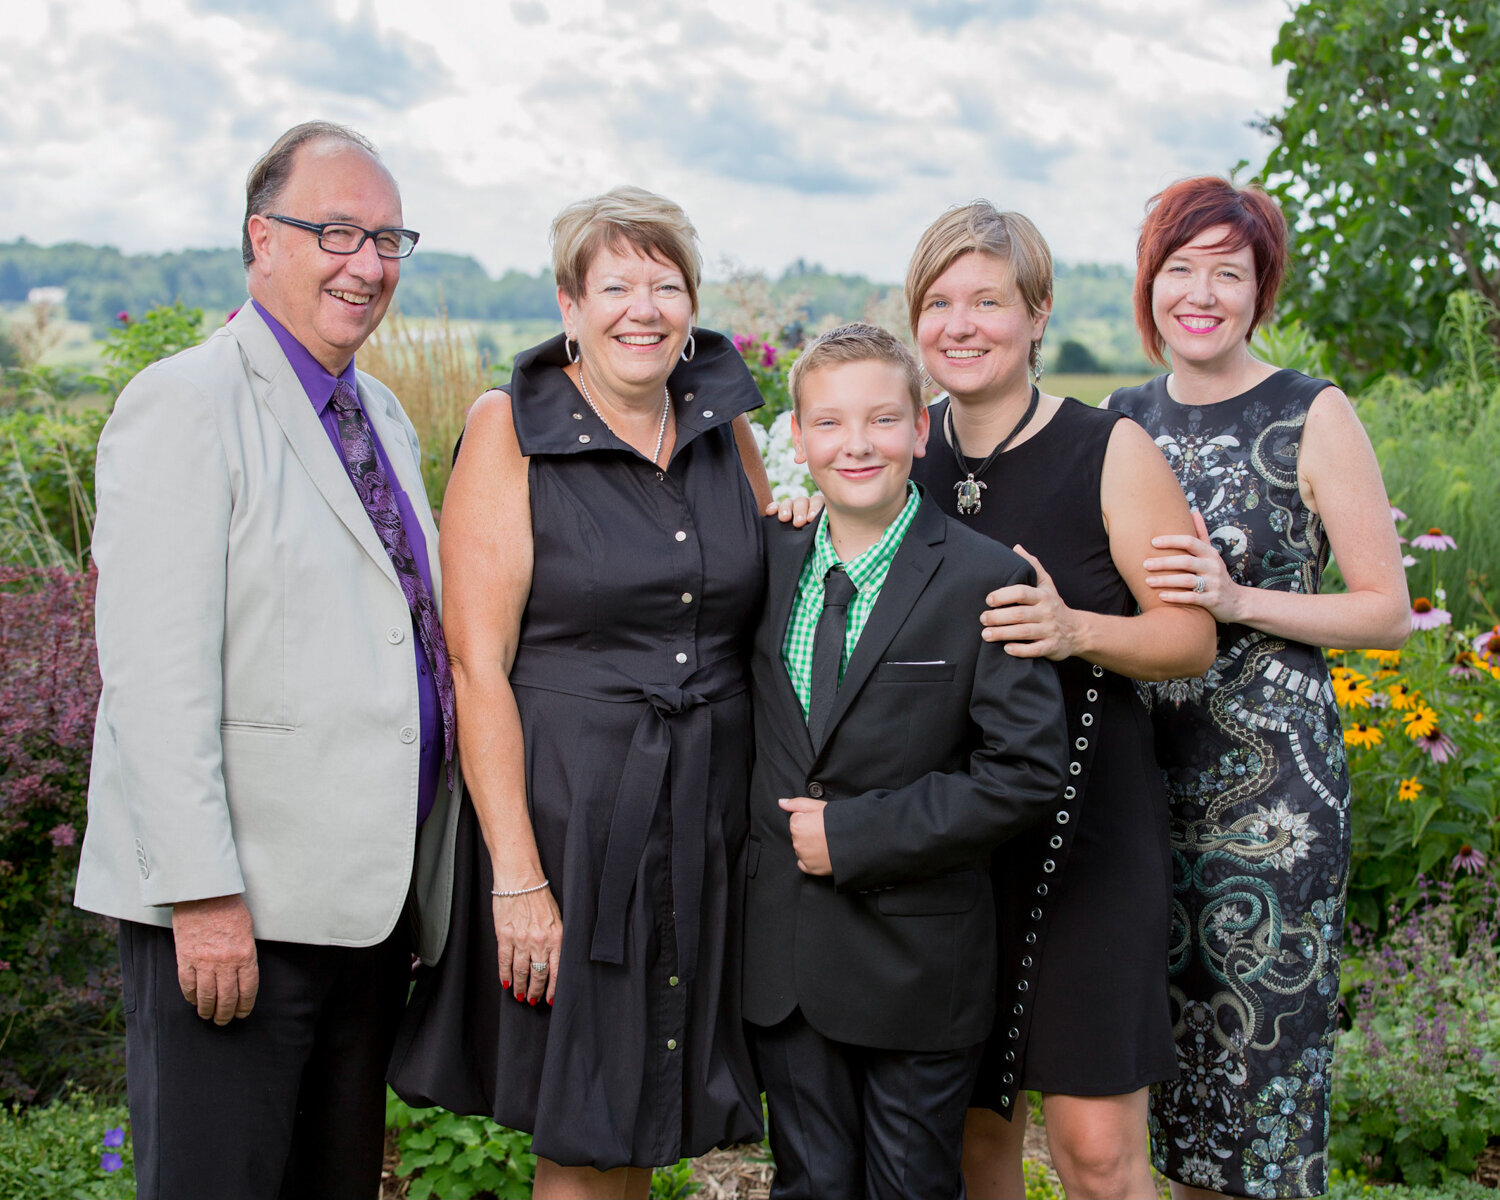 09-formal-professional-family-portraits-orangeville-ontario-outdoor-and-studio-portraiture-beeton-ontario-dressy-fun-indoor-group-pictures-wall-art-mothers-day-fathers-day.jpg